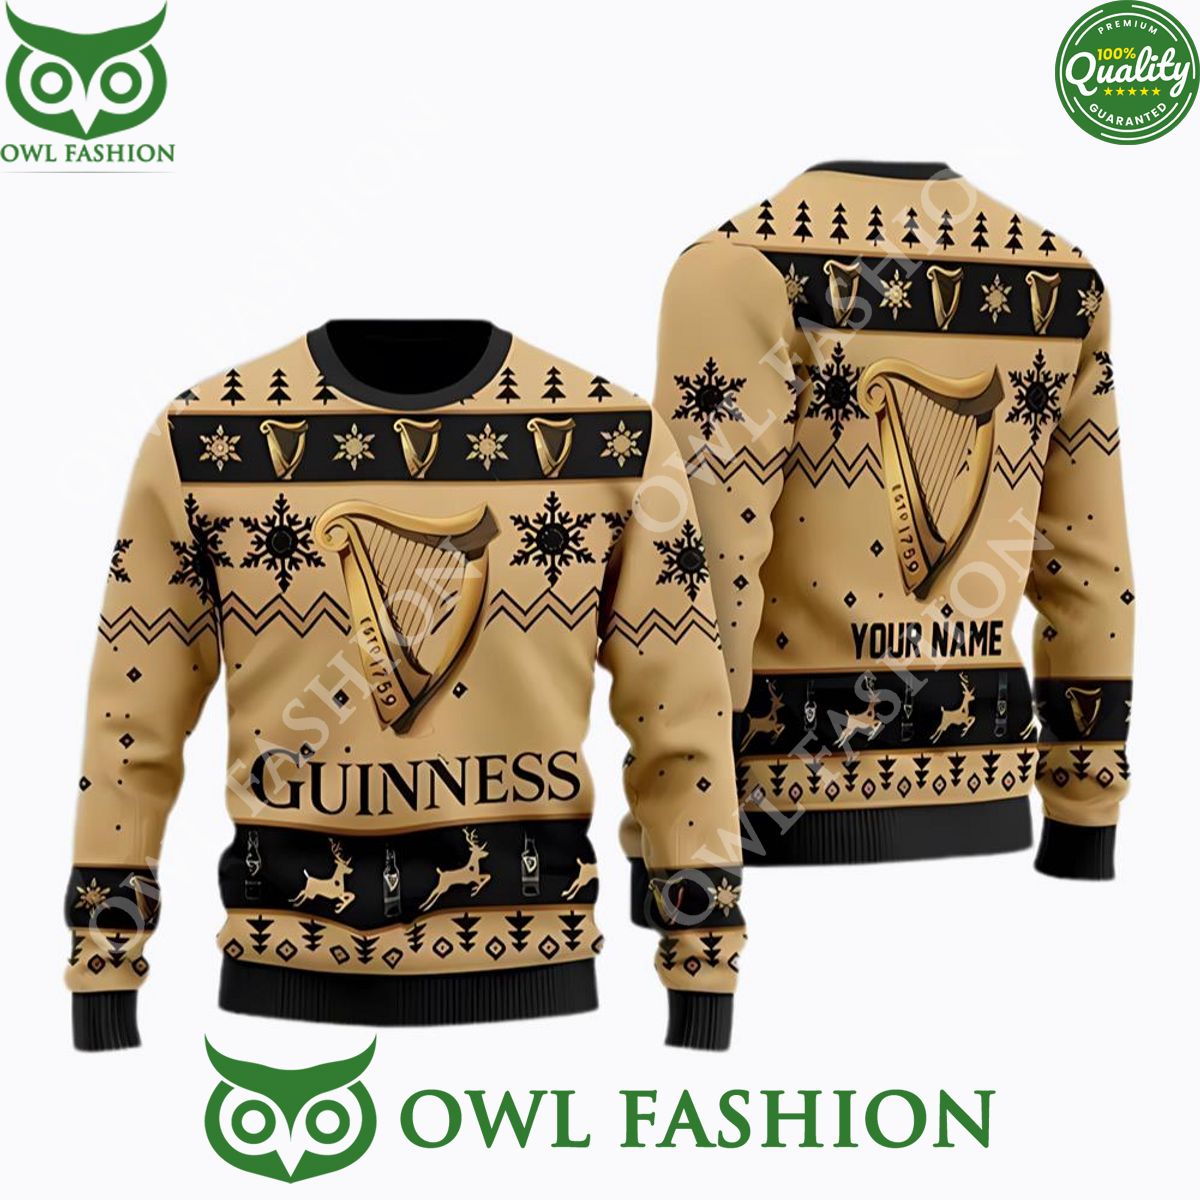 Guinness Beer Personalized Christmas Sweater Jumpers